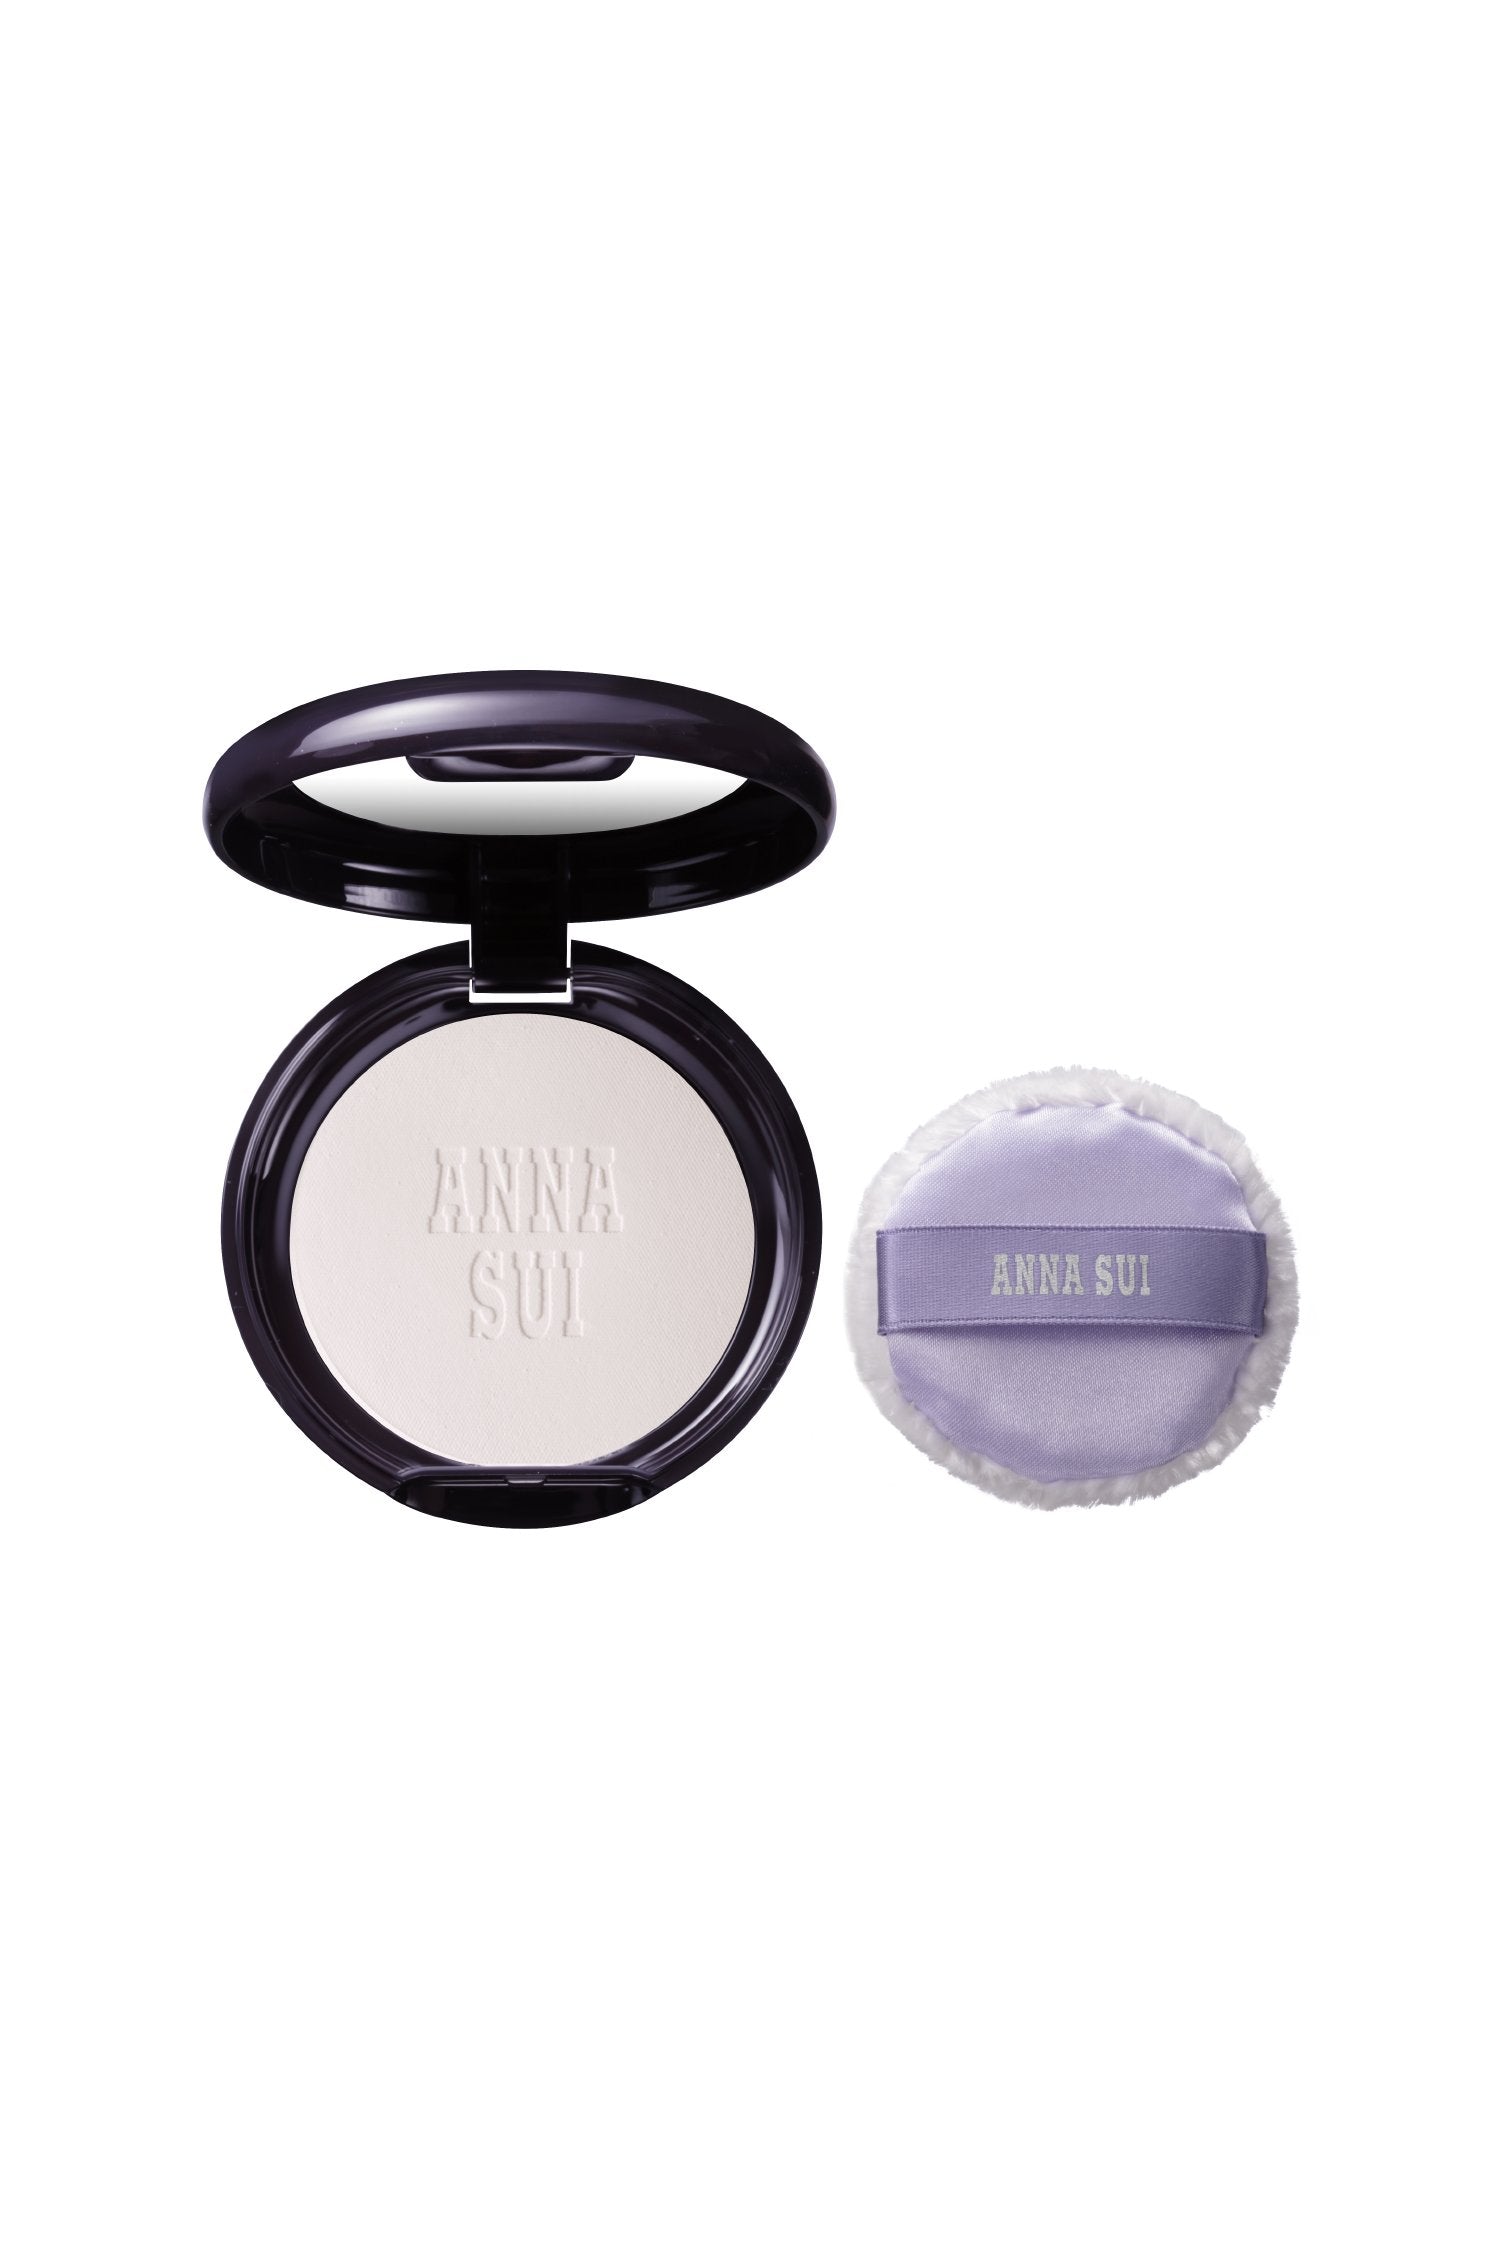 Open case of new skin-brightening powder, round, with a mirror, and a fluffy violet pad with Anna Sui label 